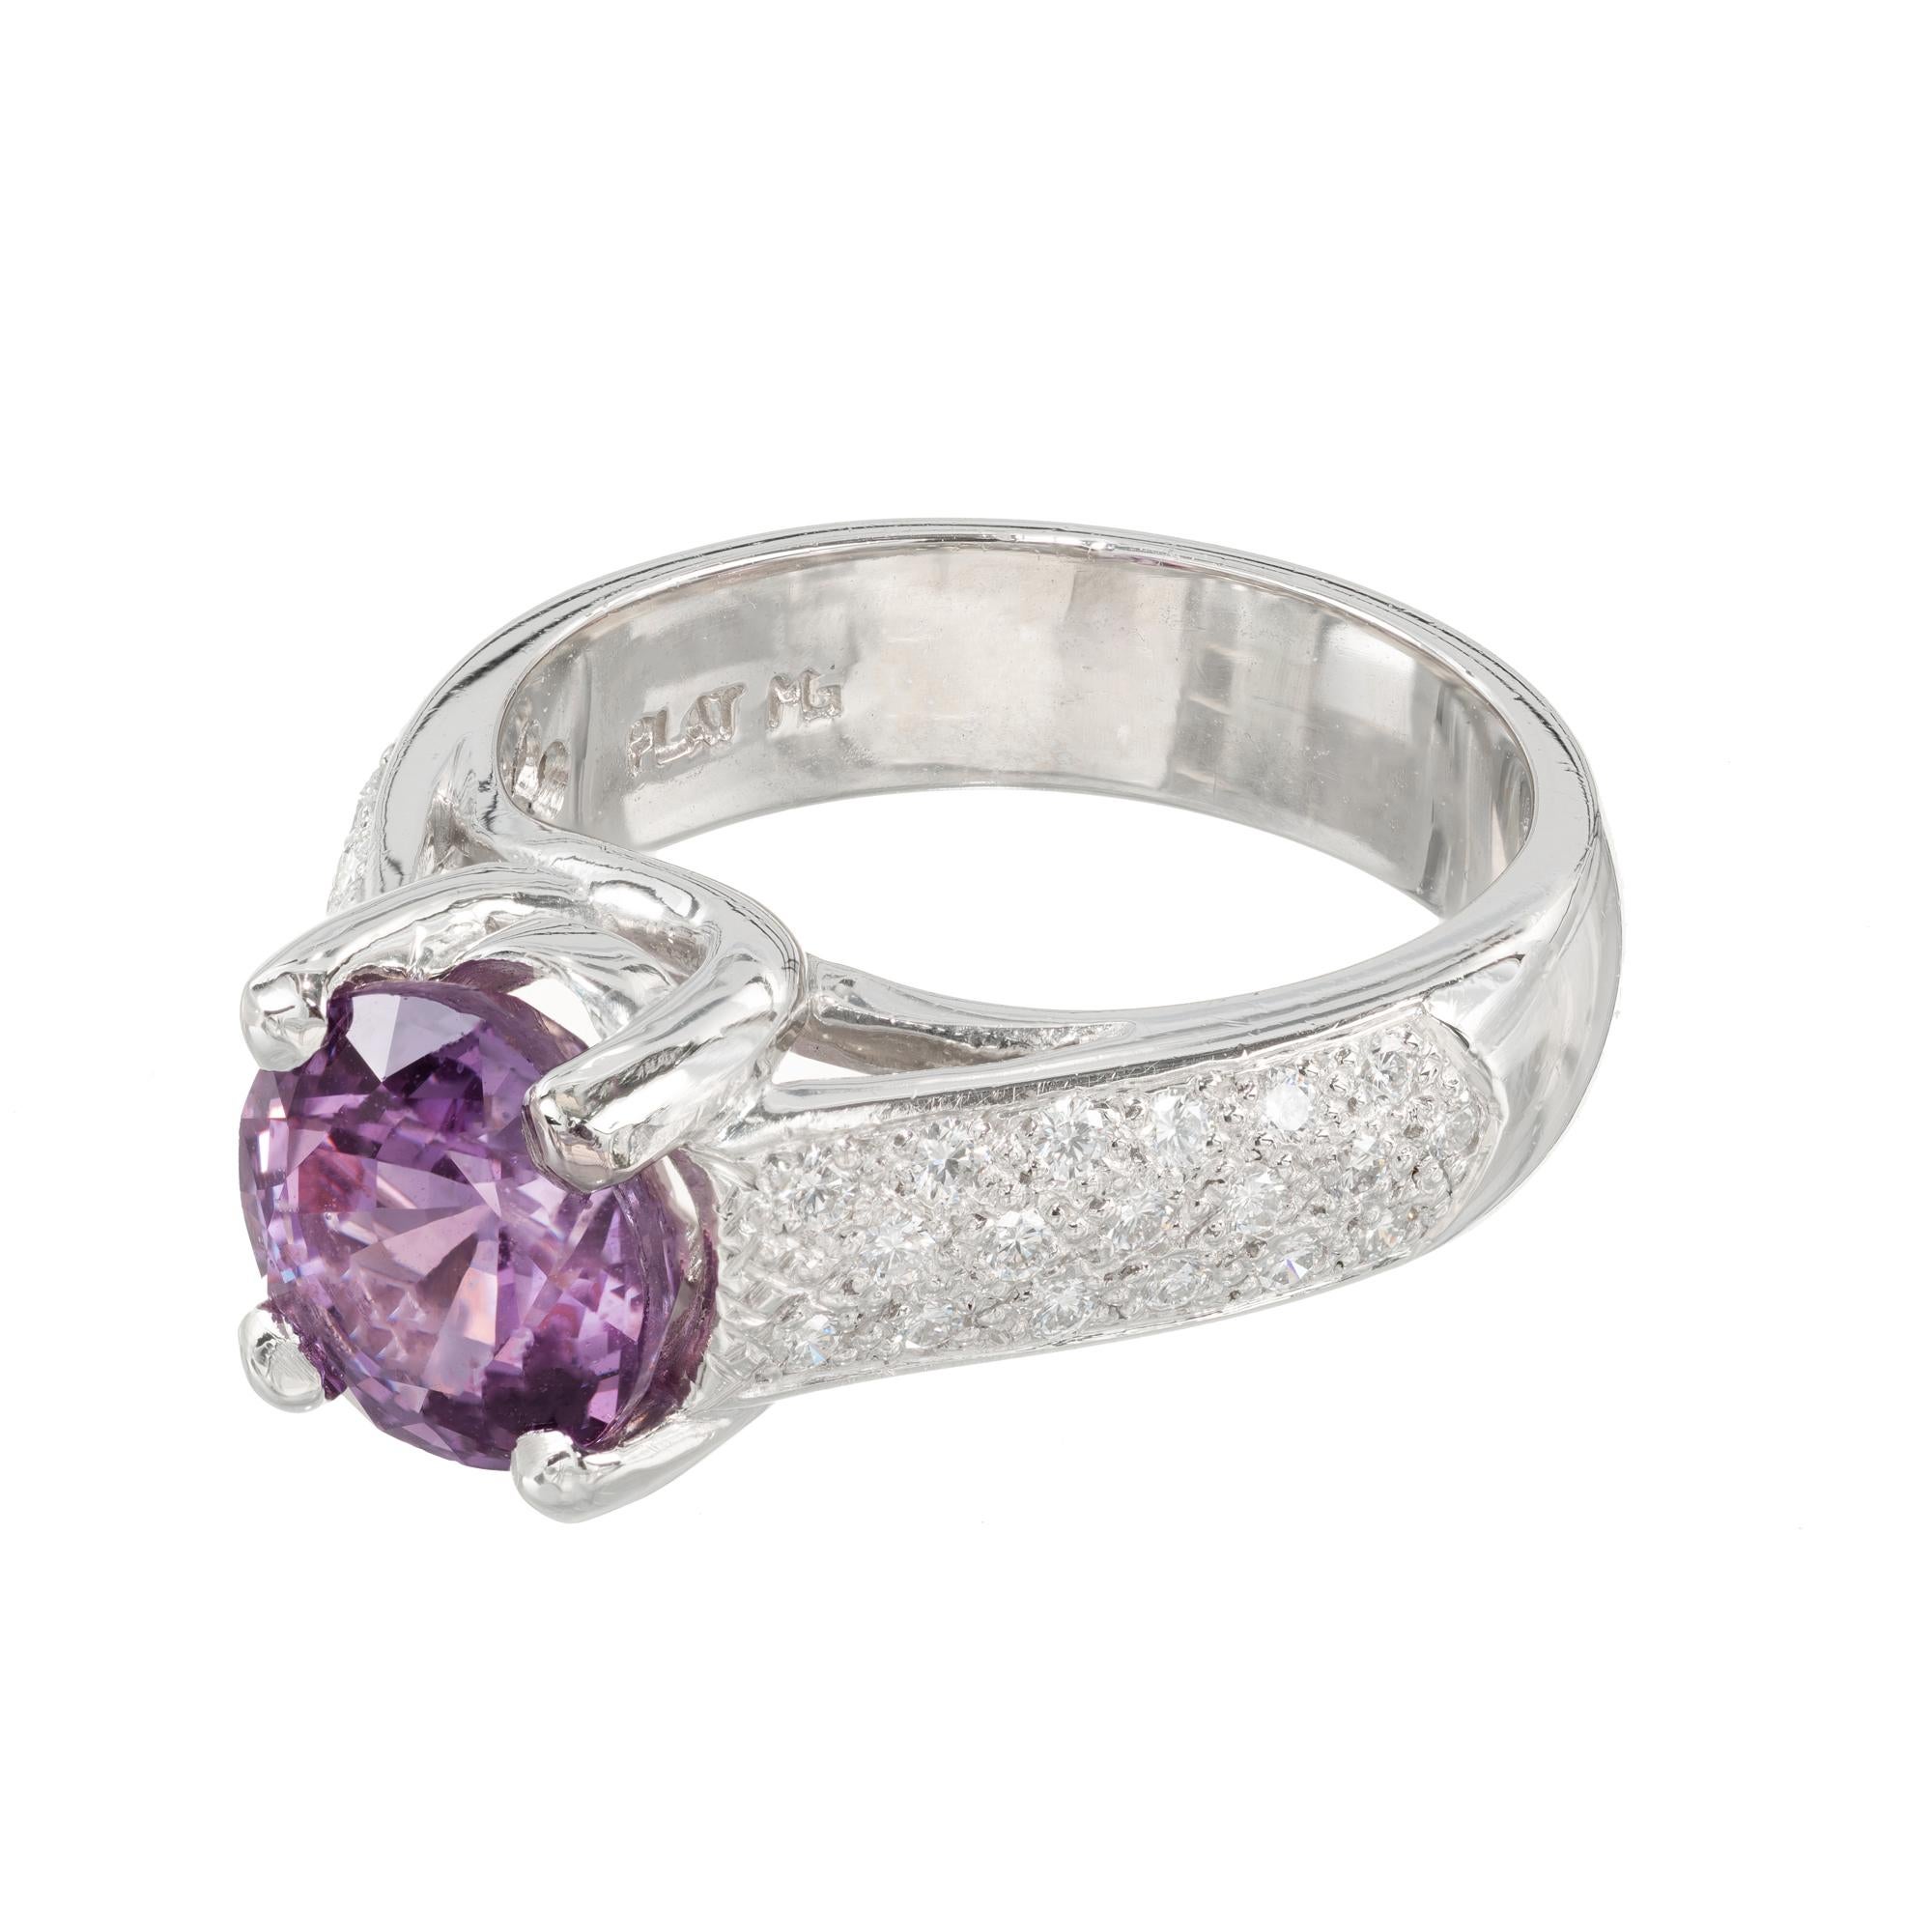 Purple sapphire and diamond engagement ring. GIA certified Fancy color natural no heat, no enhancement center Sapphire stone with pave set accent diamonds in a platinum setting. Designed and crafted in the Peter Suchy Jewelers Workshop. 

1 Bright